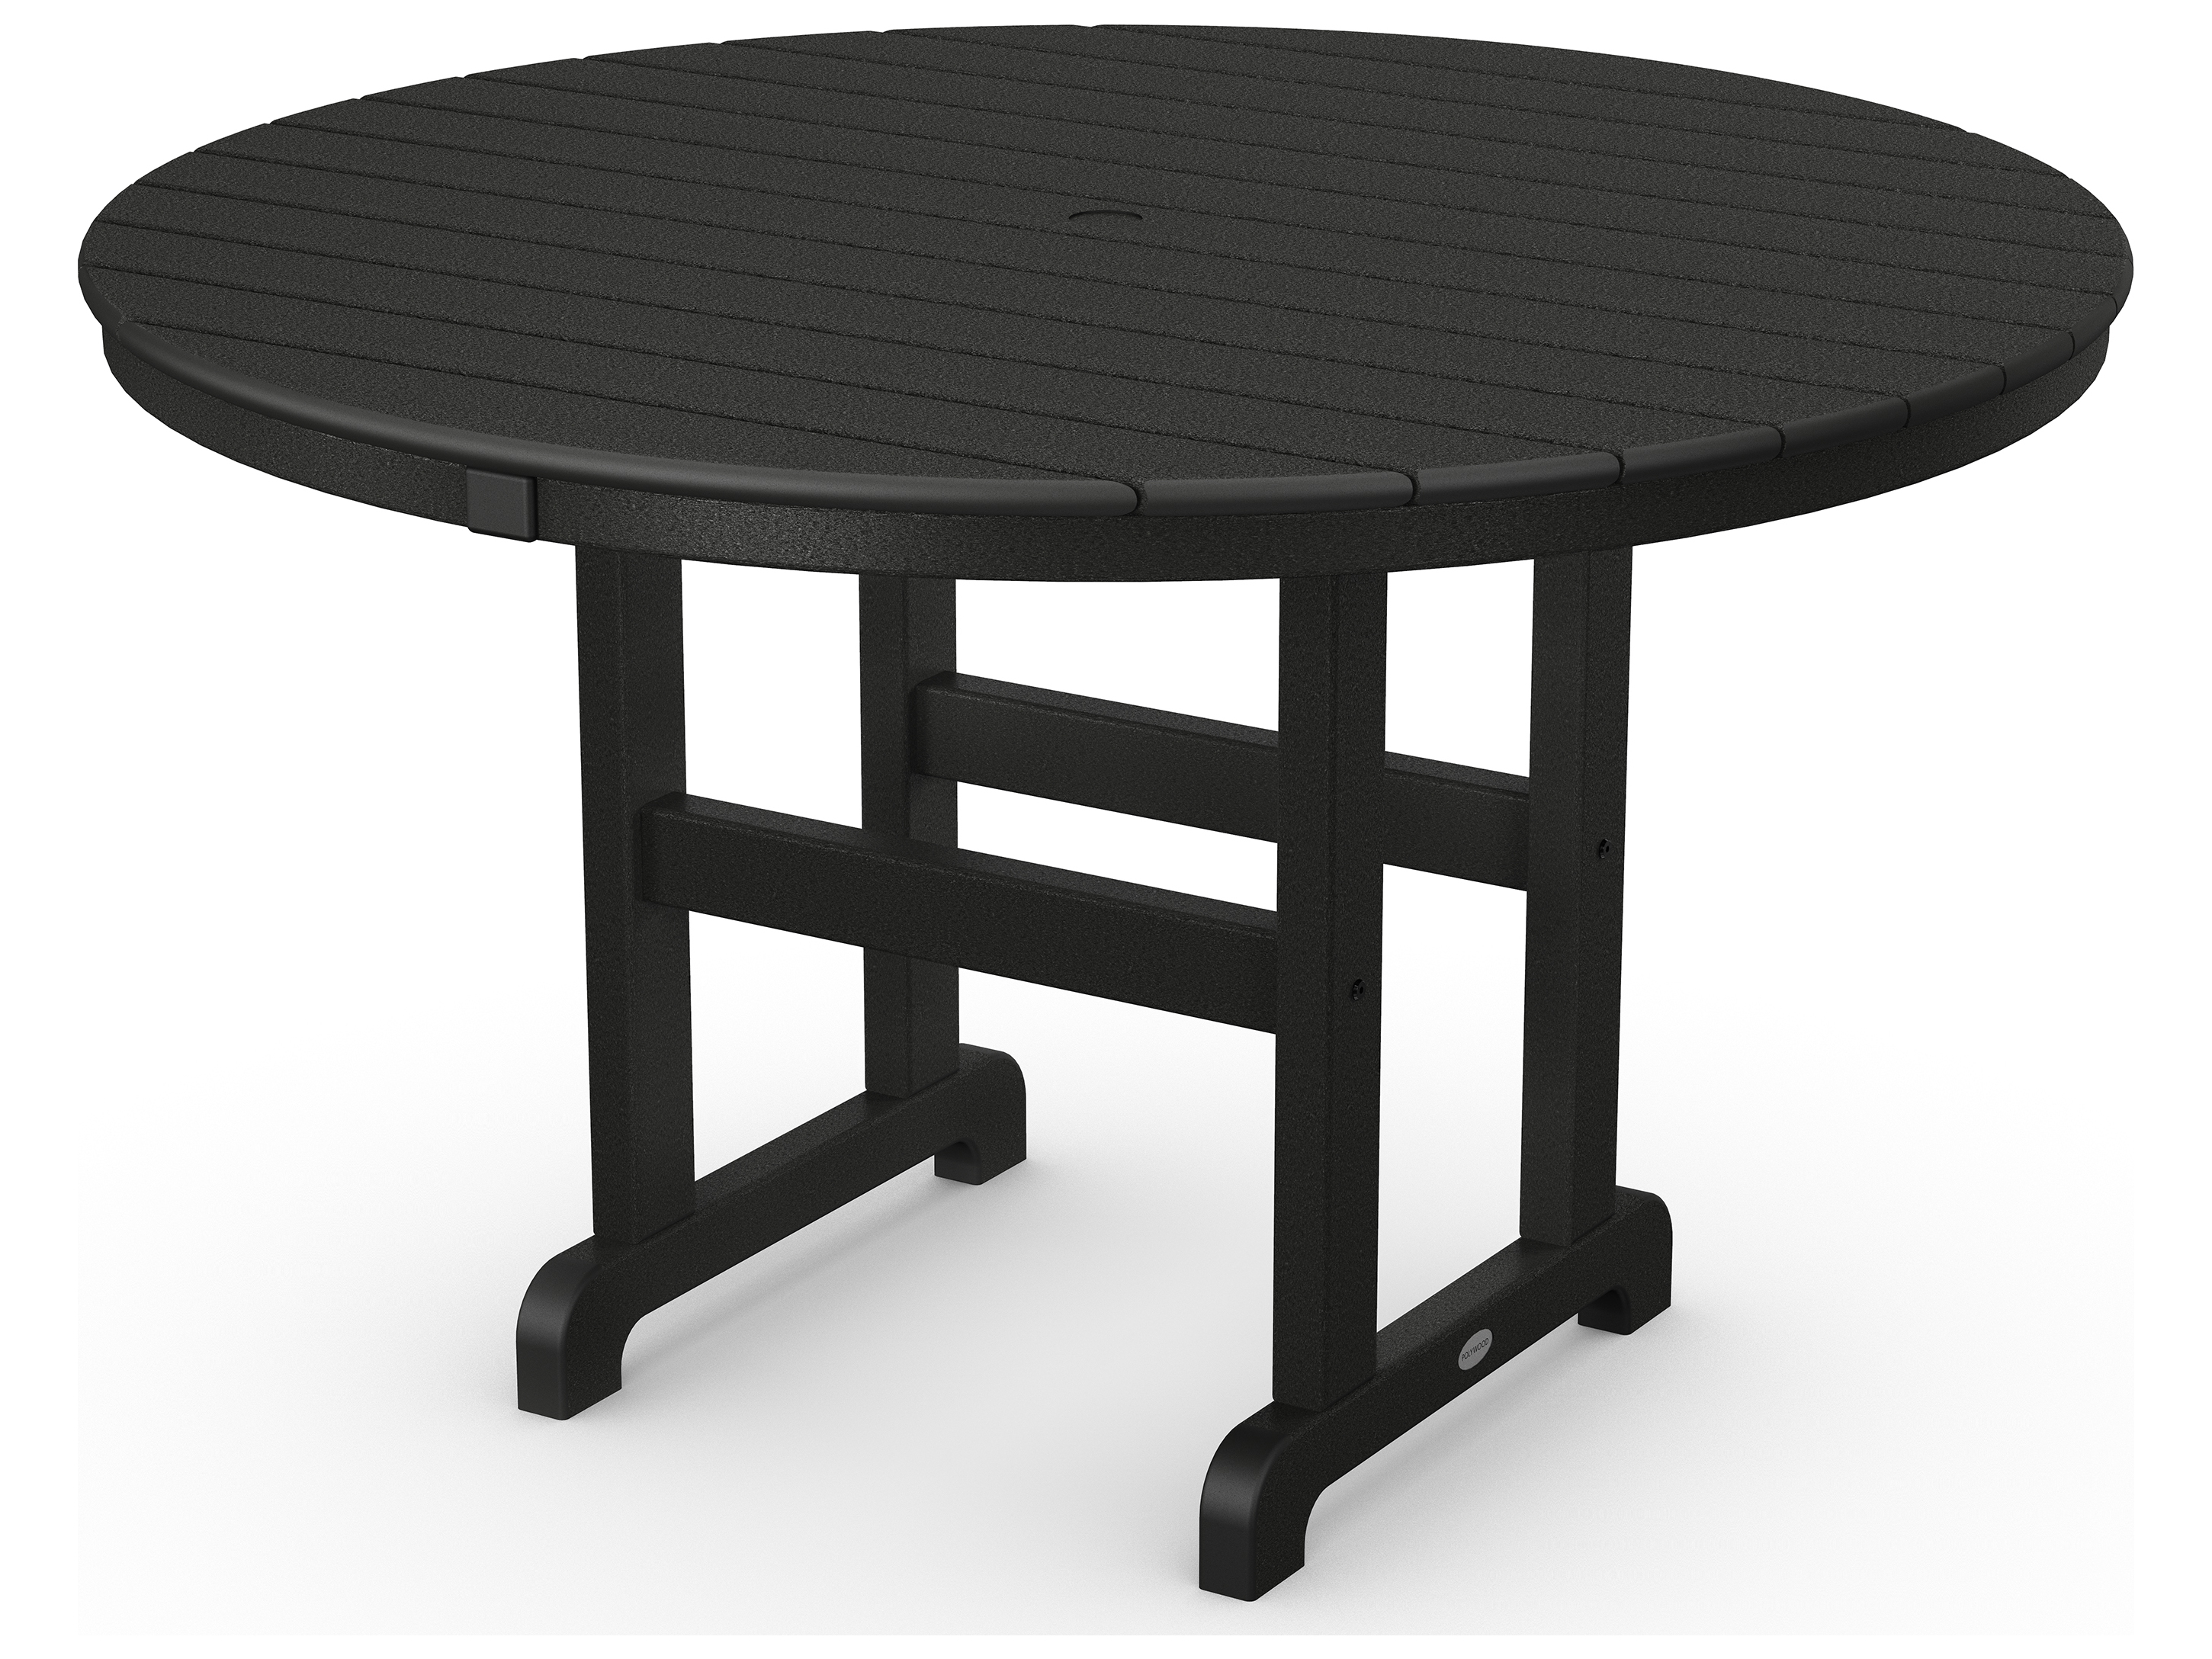 Polywood La Casa Cafe Recycled Plastic, Round Dining Table With Umbrella Hole